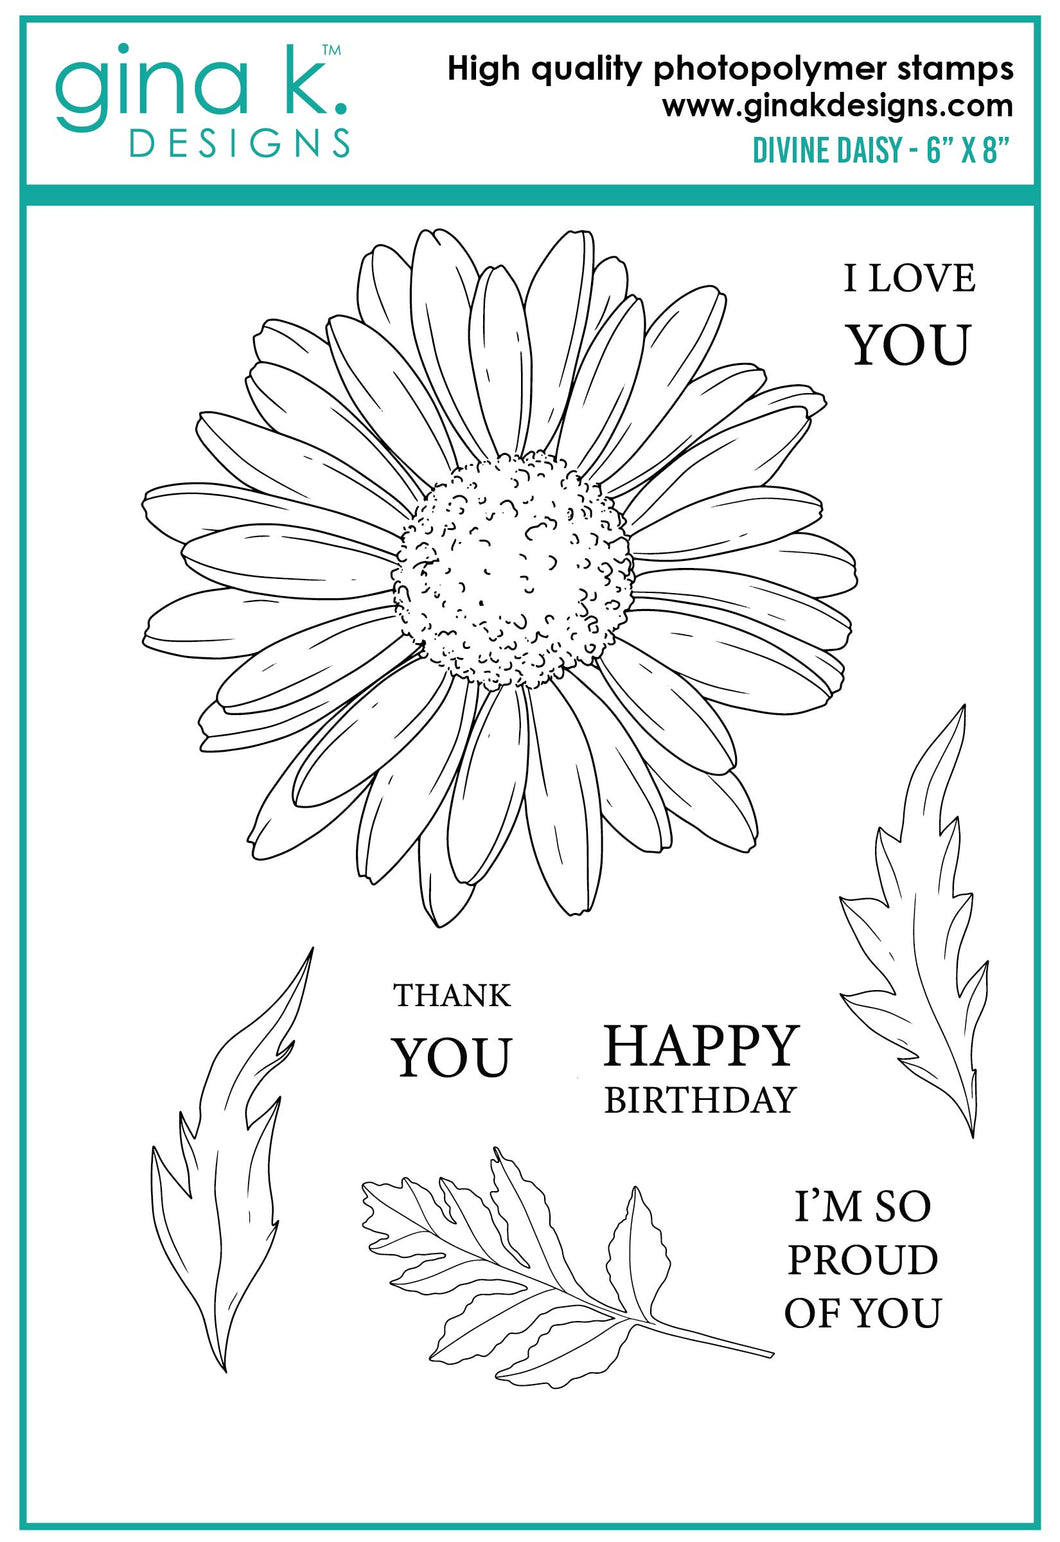 Gina K. Designs - Stamp & Die Set - Divine Daisy. Divine Daisy is a stamp set by Hannah Drapinski. This set is made of premium clear photopolymer and measures 6